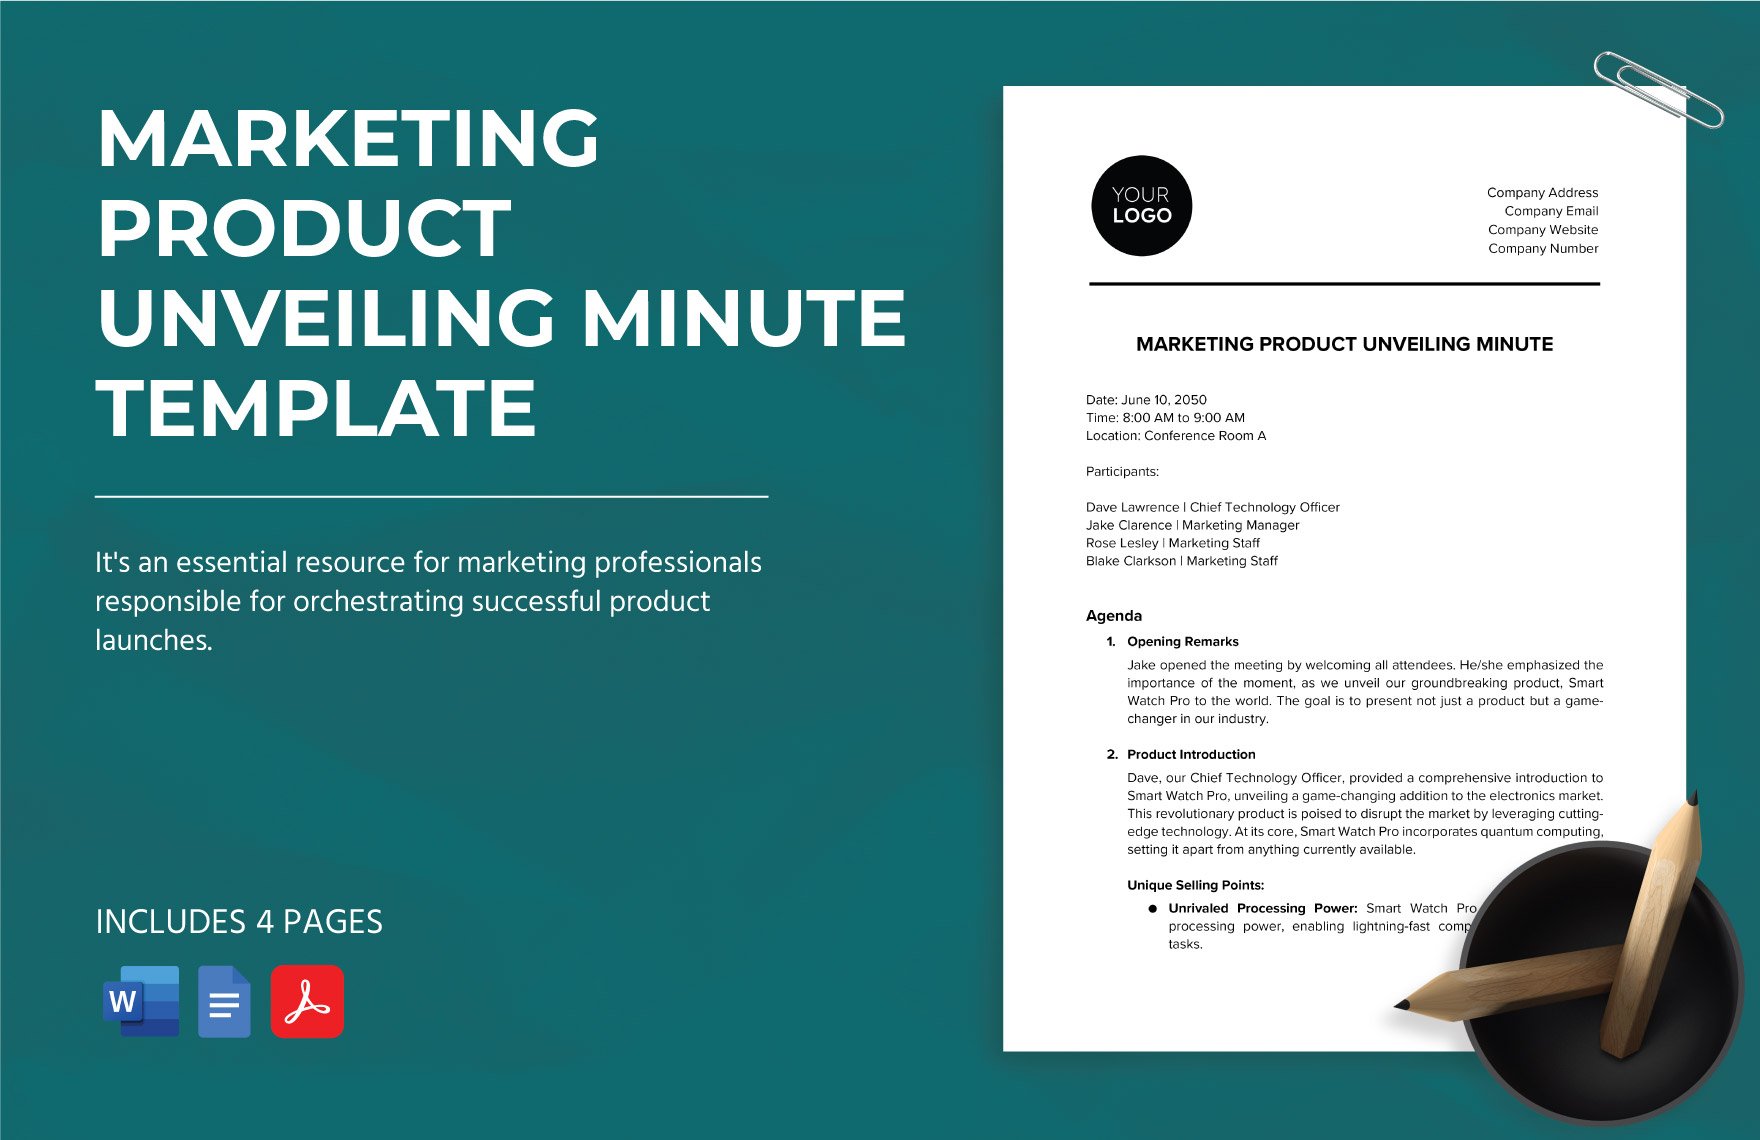 Marketing Product Unveiling Minute Template in Word, Google Docs, PDF